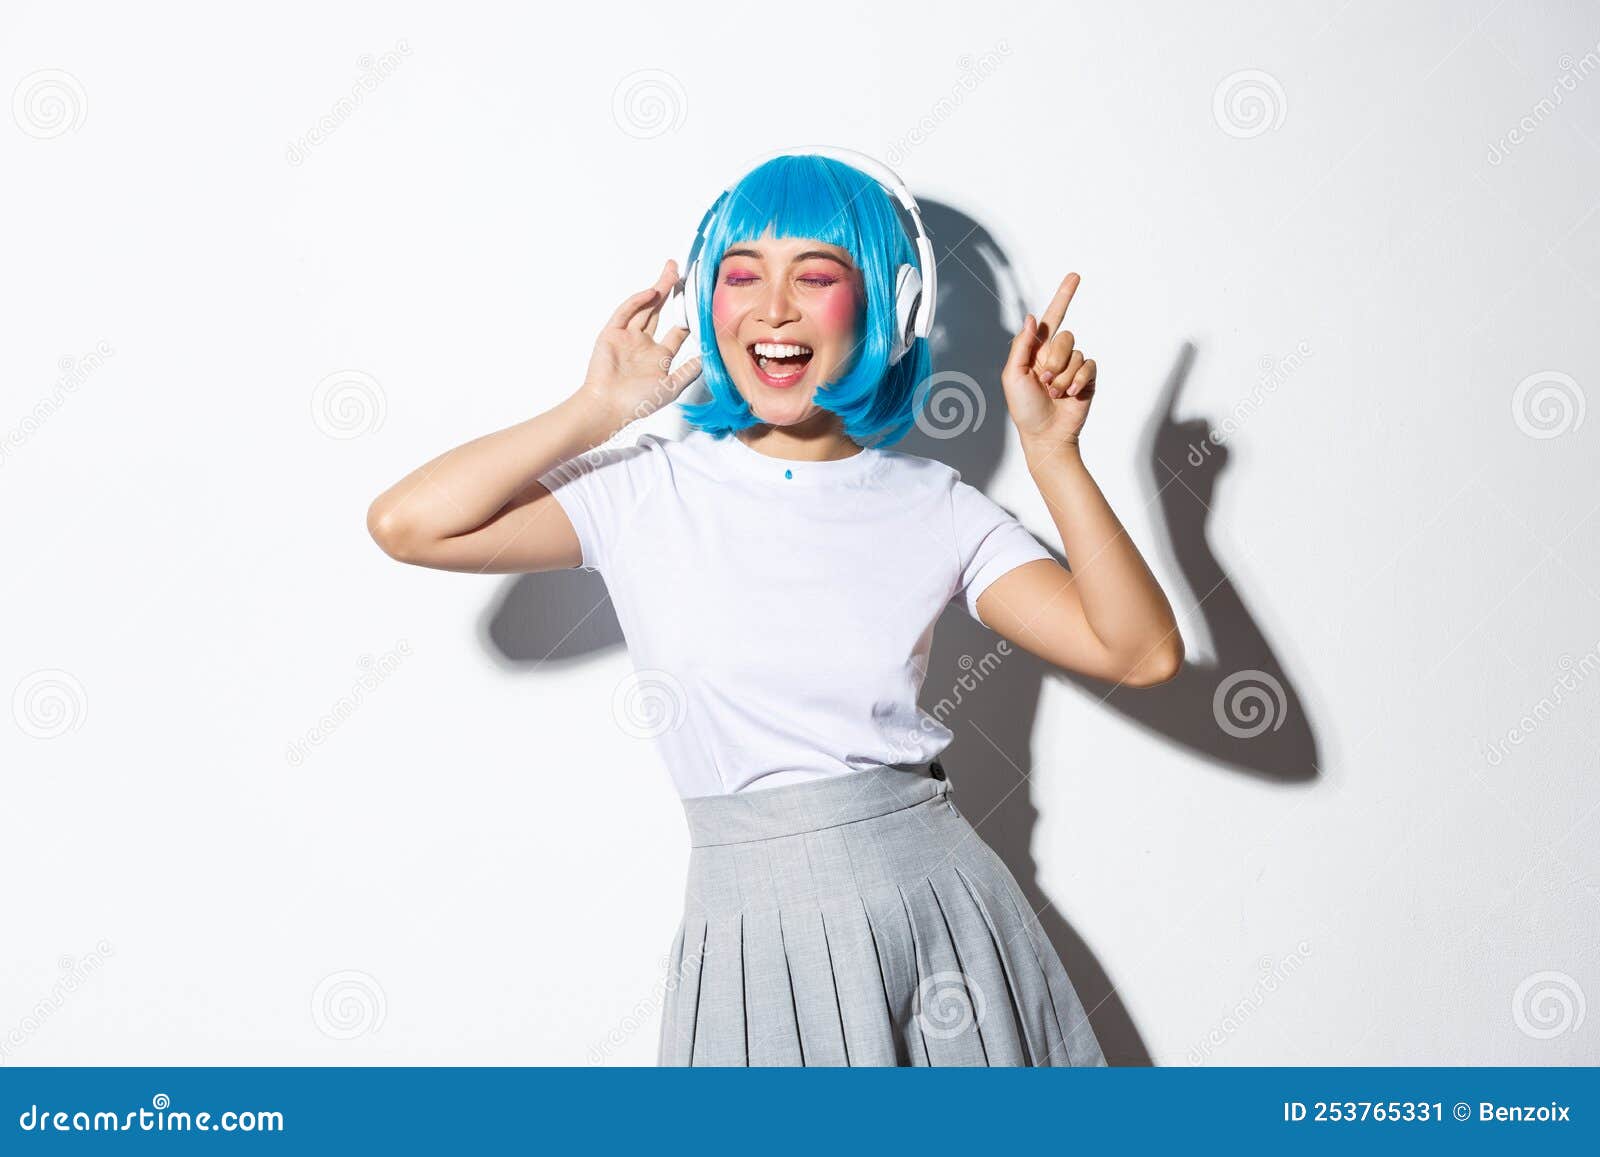 Japanese girl with dyed blue hair - wide 1